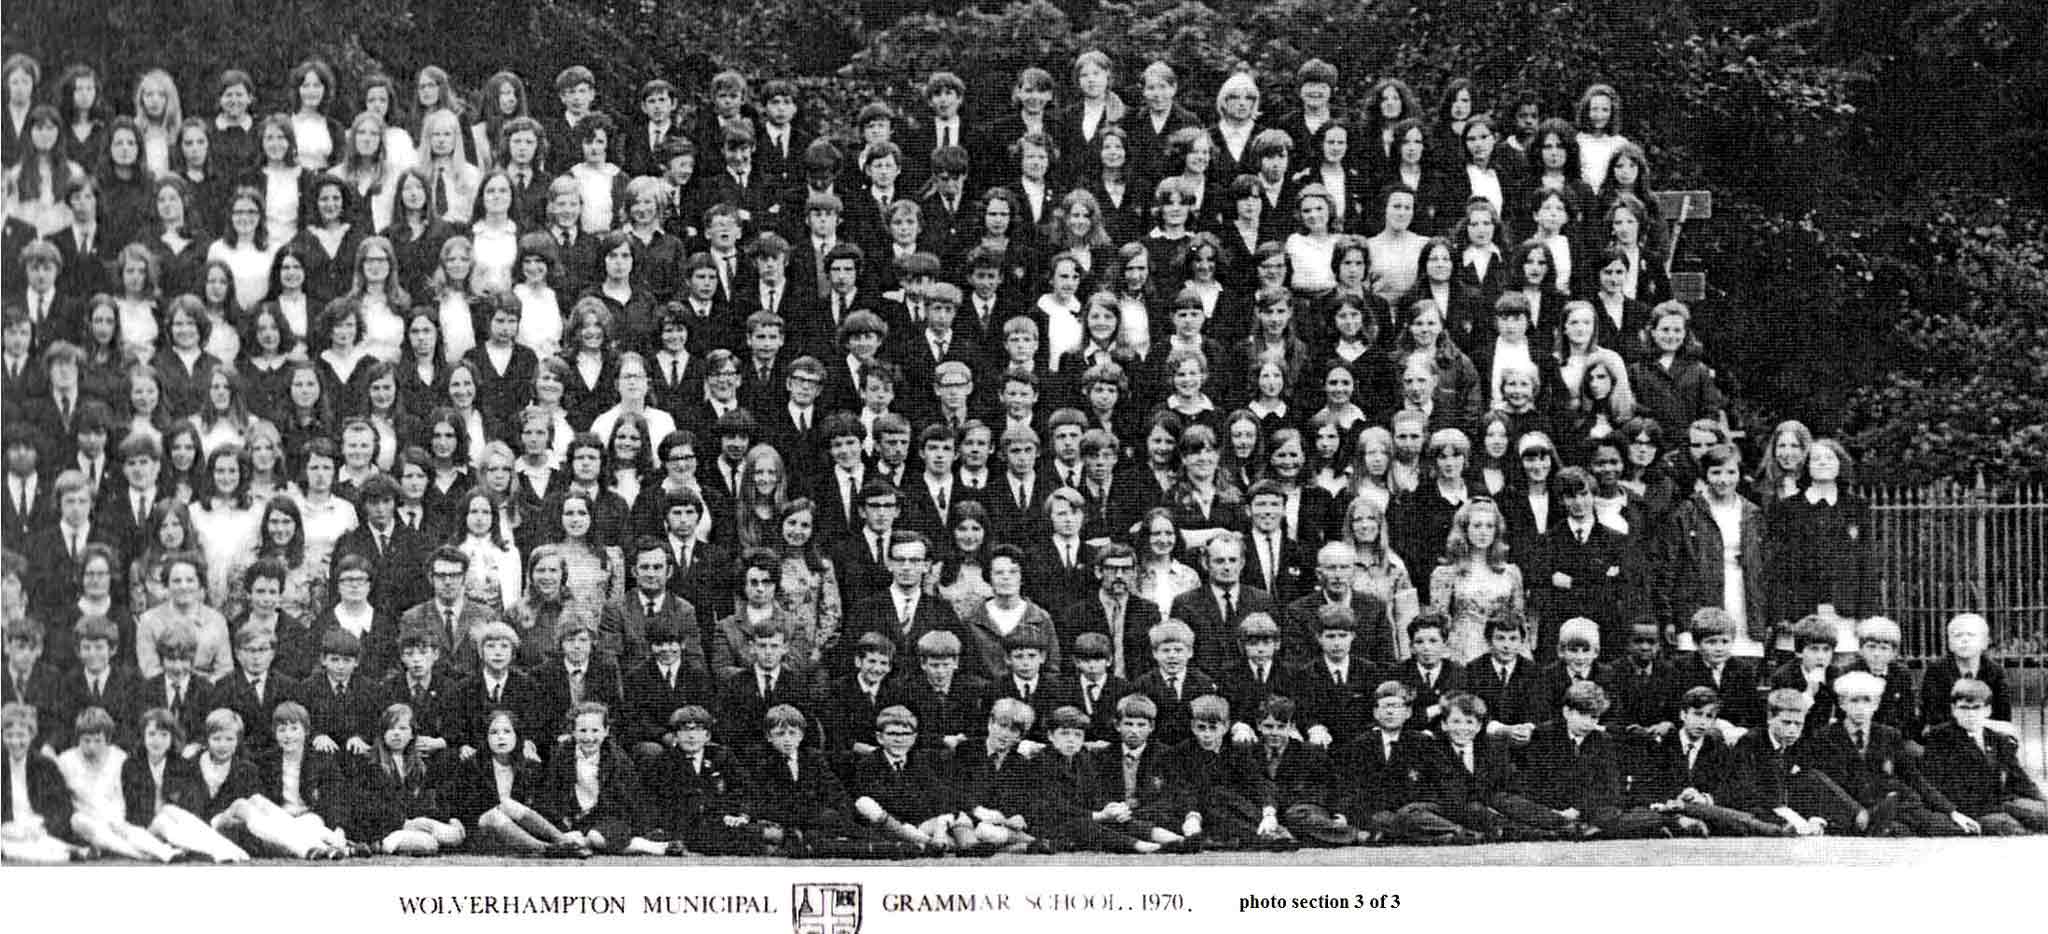 the 1970 Right hand side of School Photograph